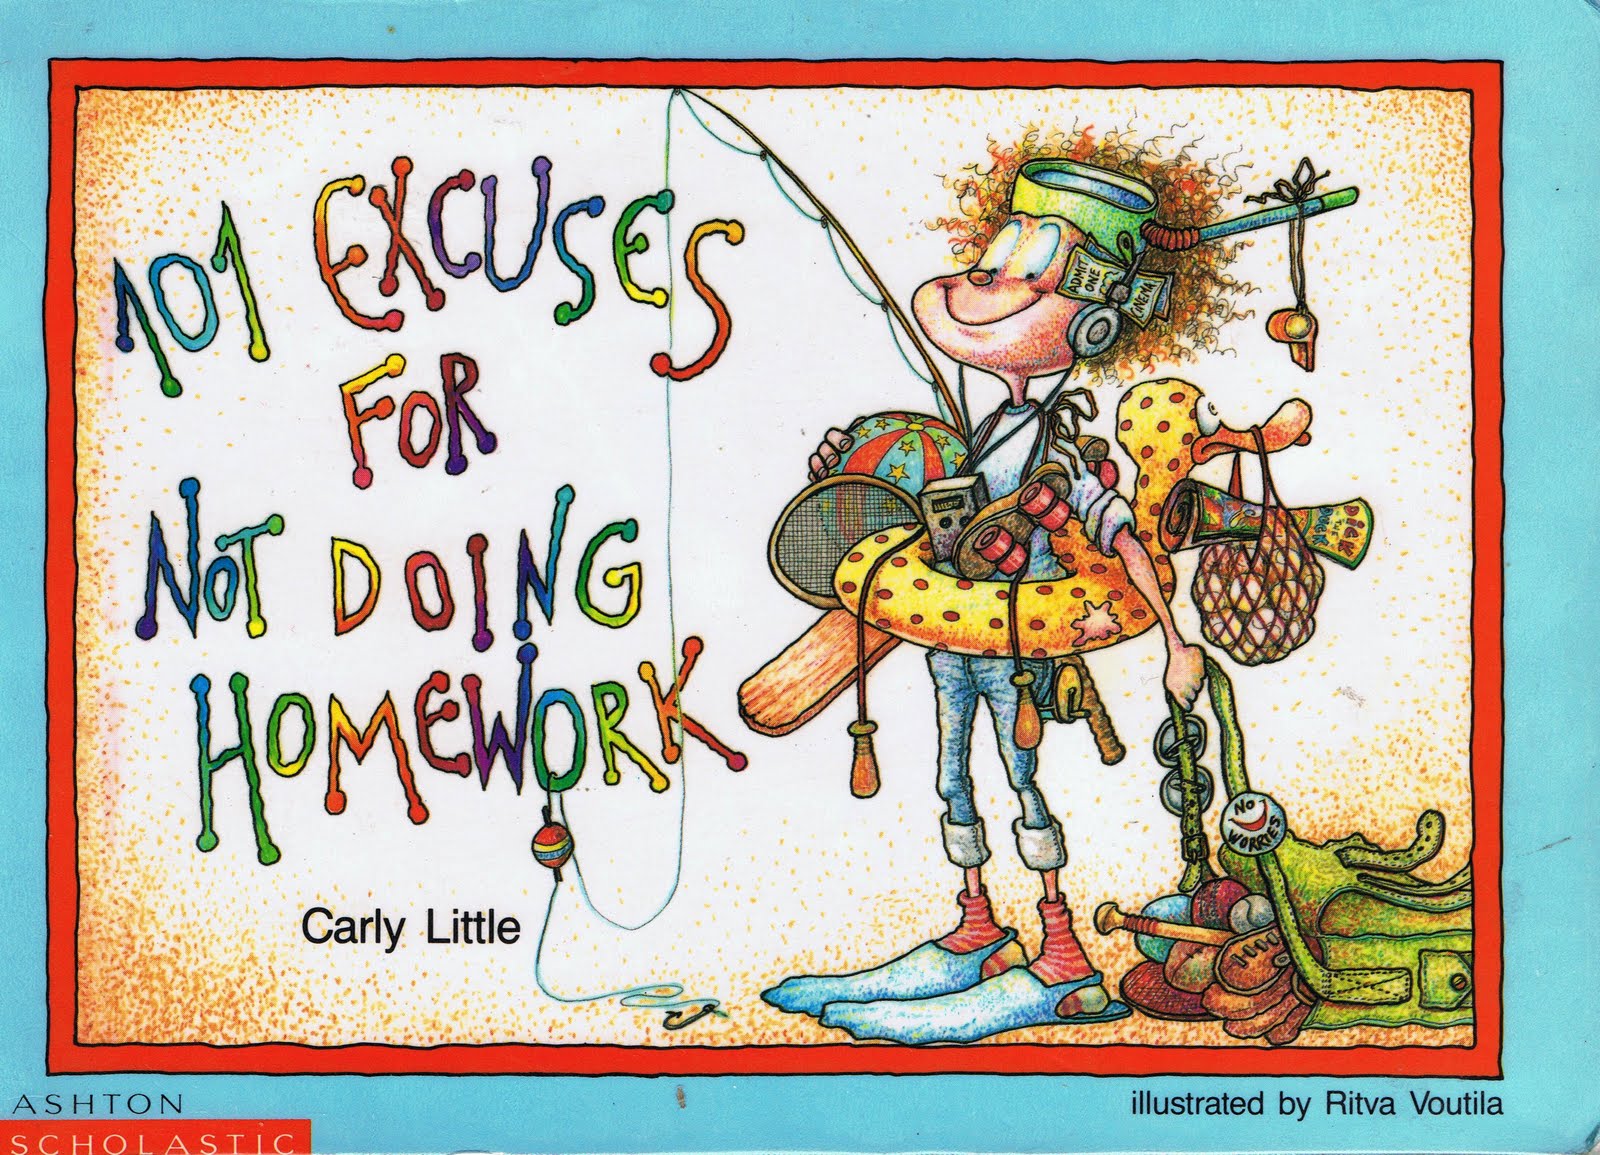 Excuses for homework